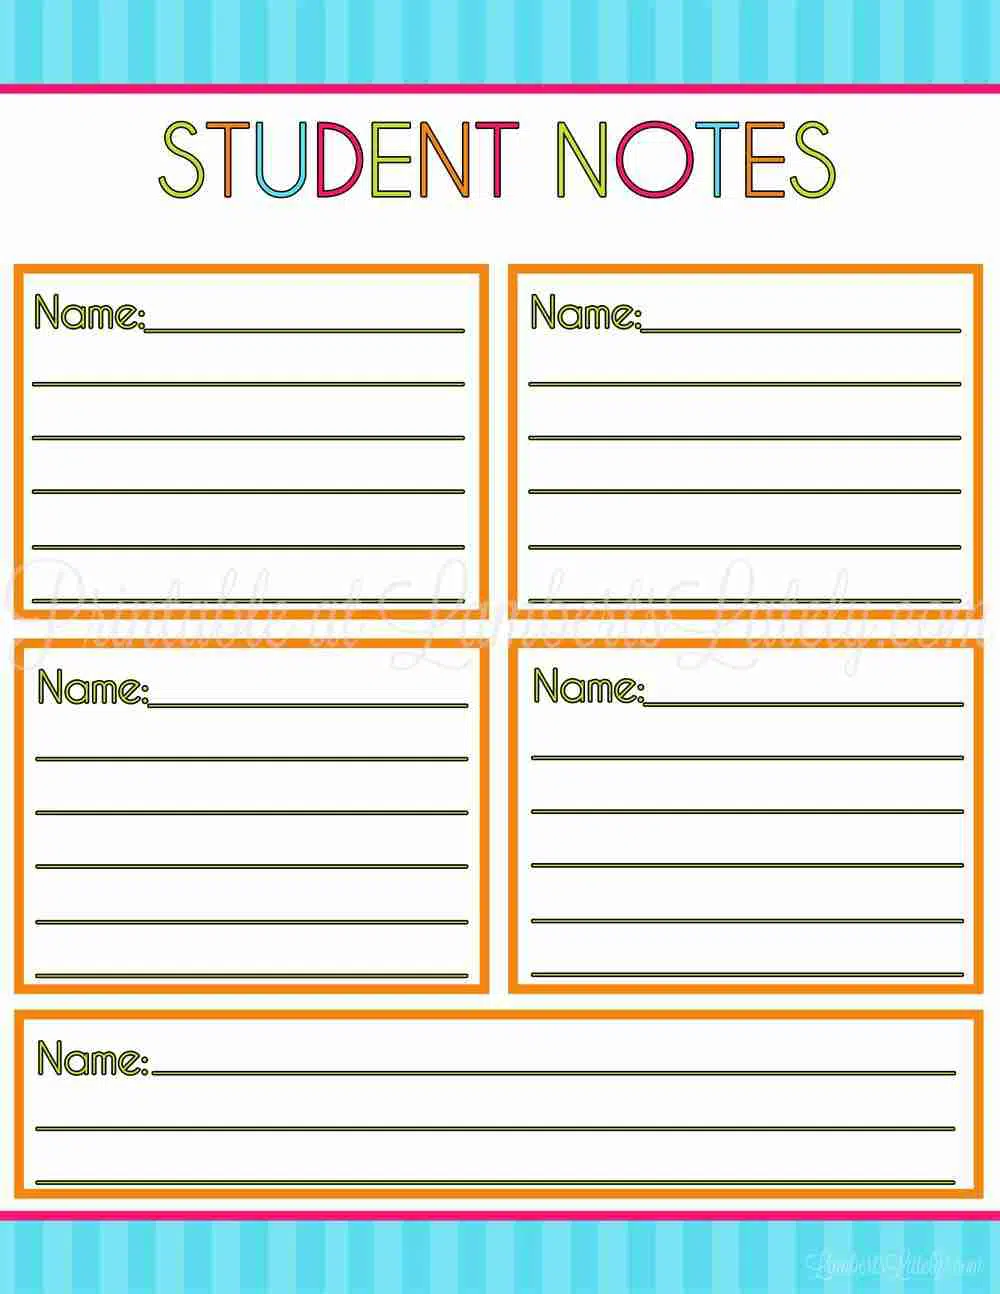 student notes printable.